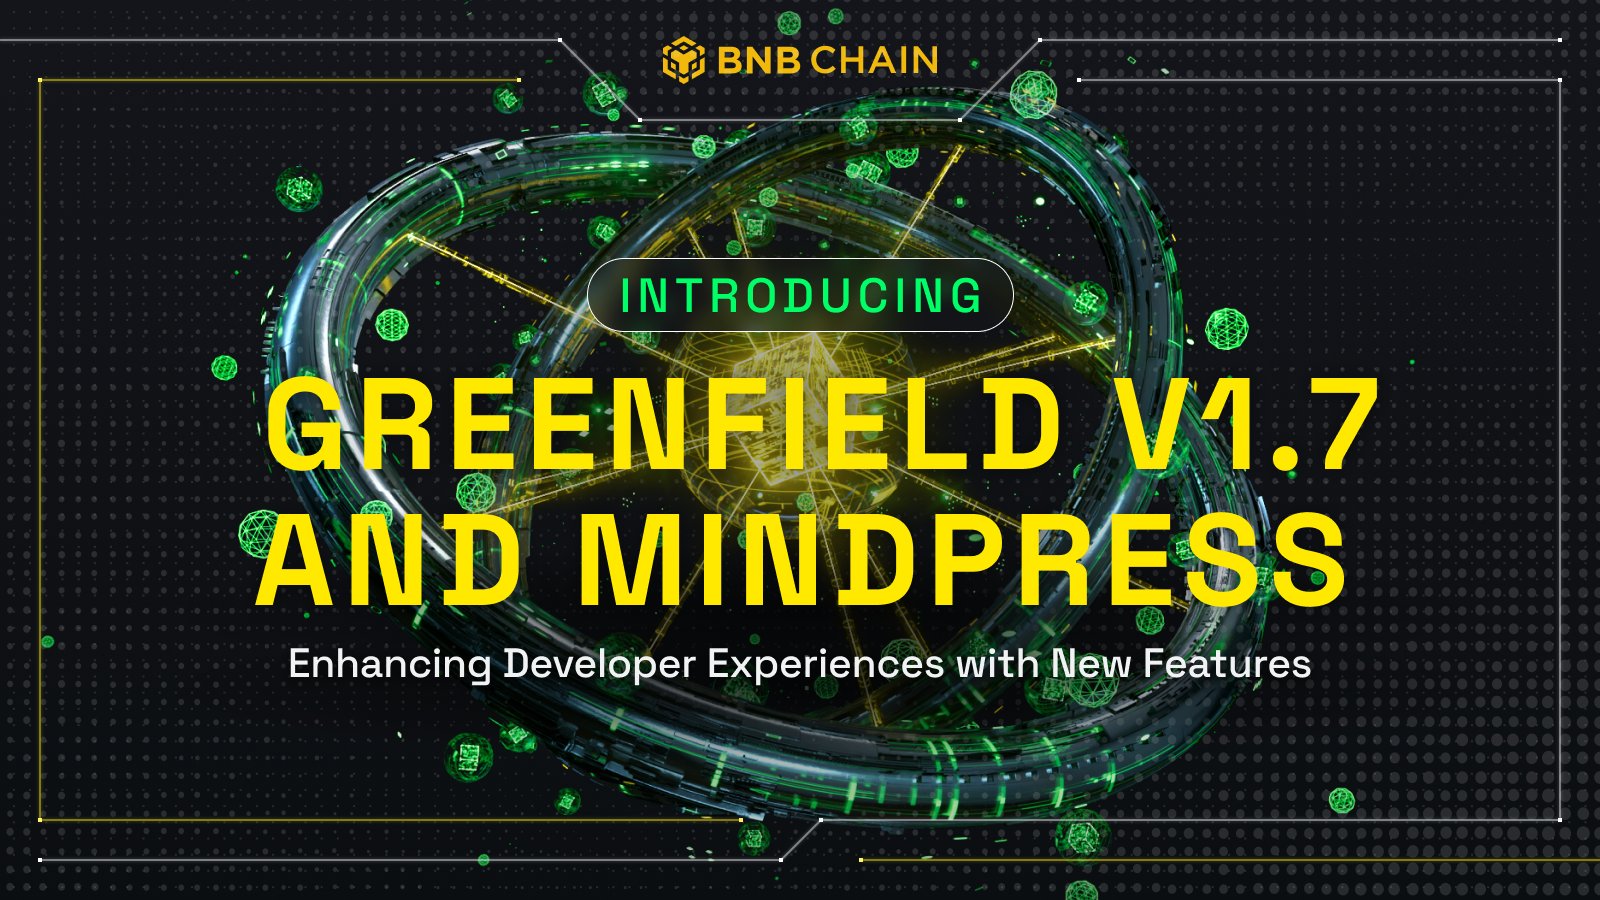 BNB Chain Introduces Greenfield Updates; Enhances Developer Experience With MindPress Integration